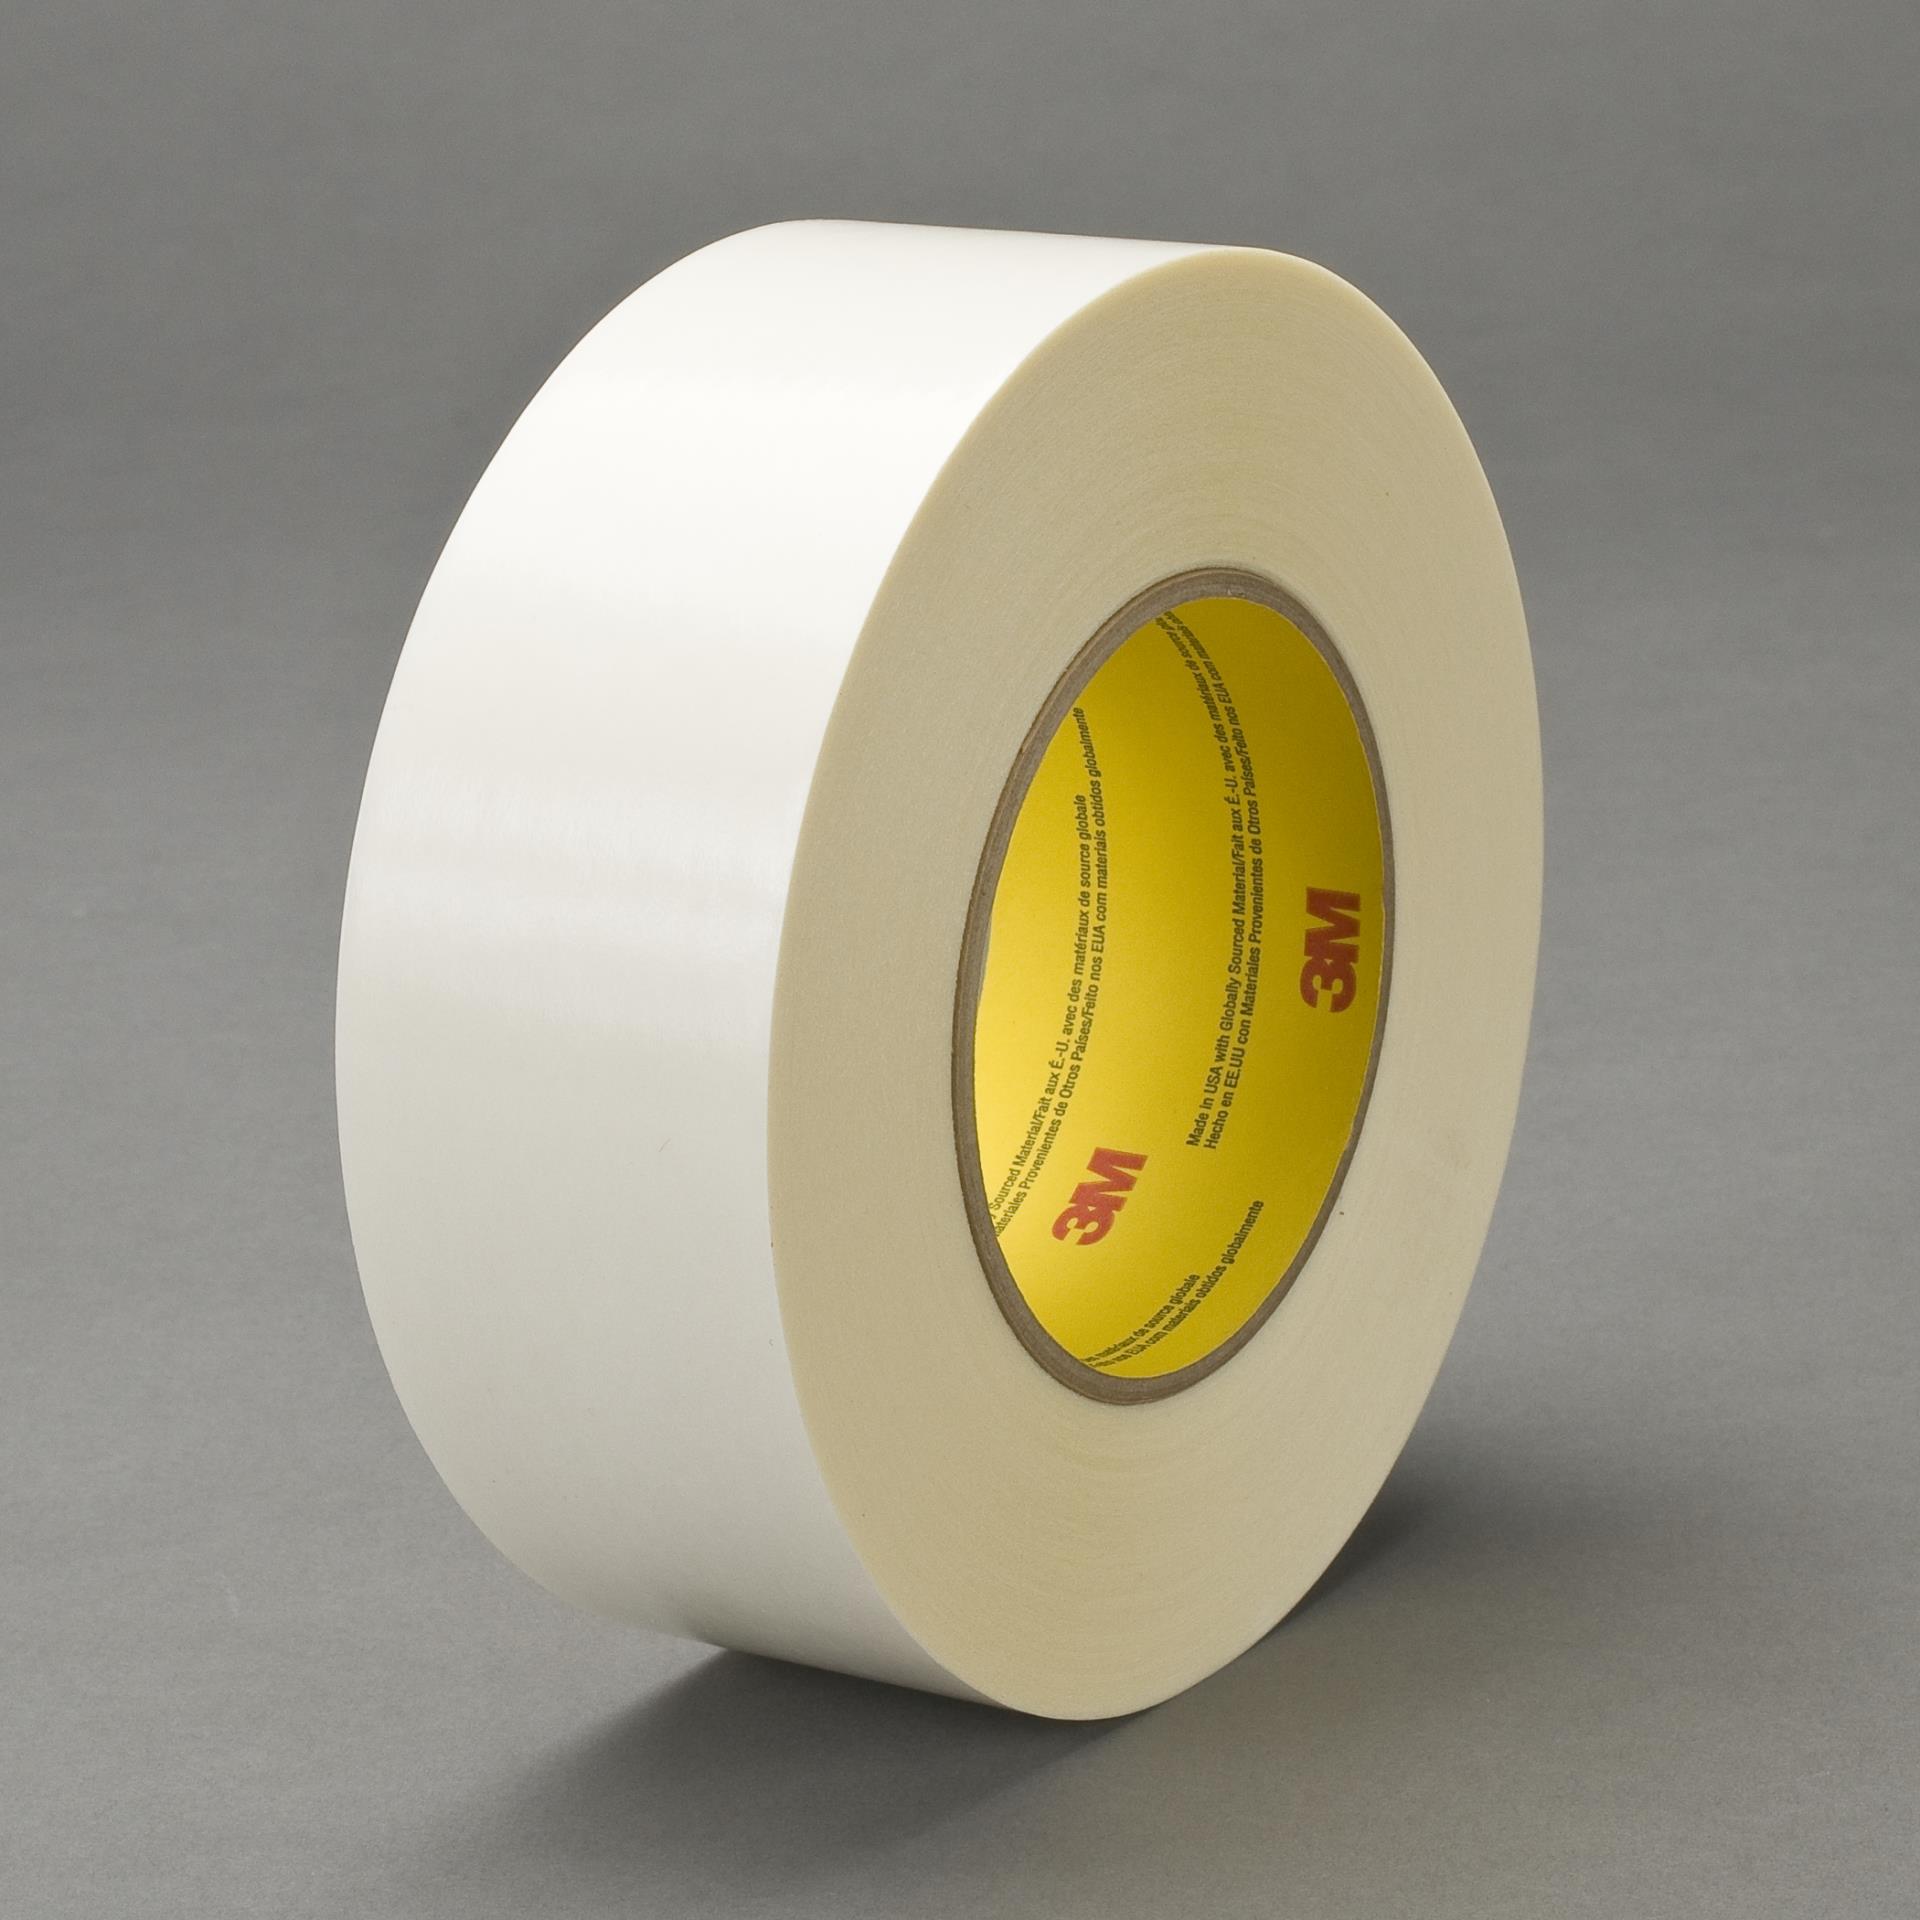 https://e-aircraftsupply.com/ItemImages/34/7010374834_3M_Double_Coated_Tape_9740_Clear.jpg